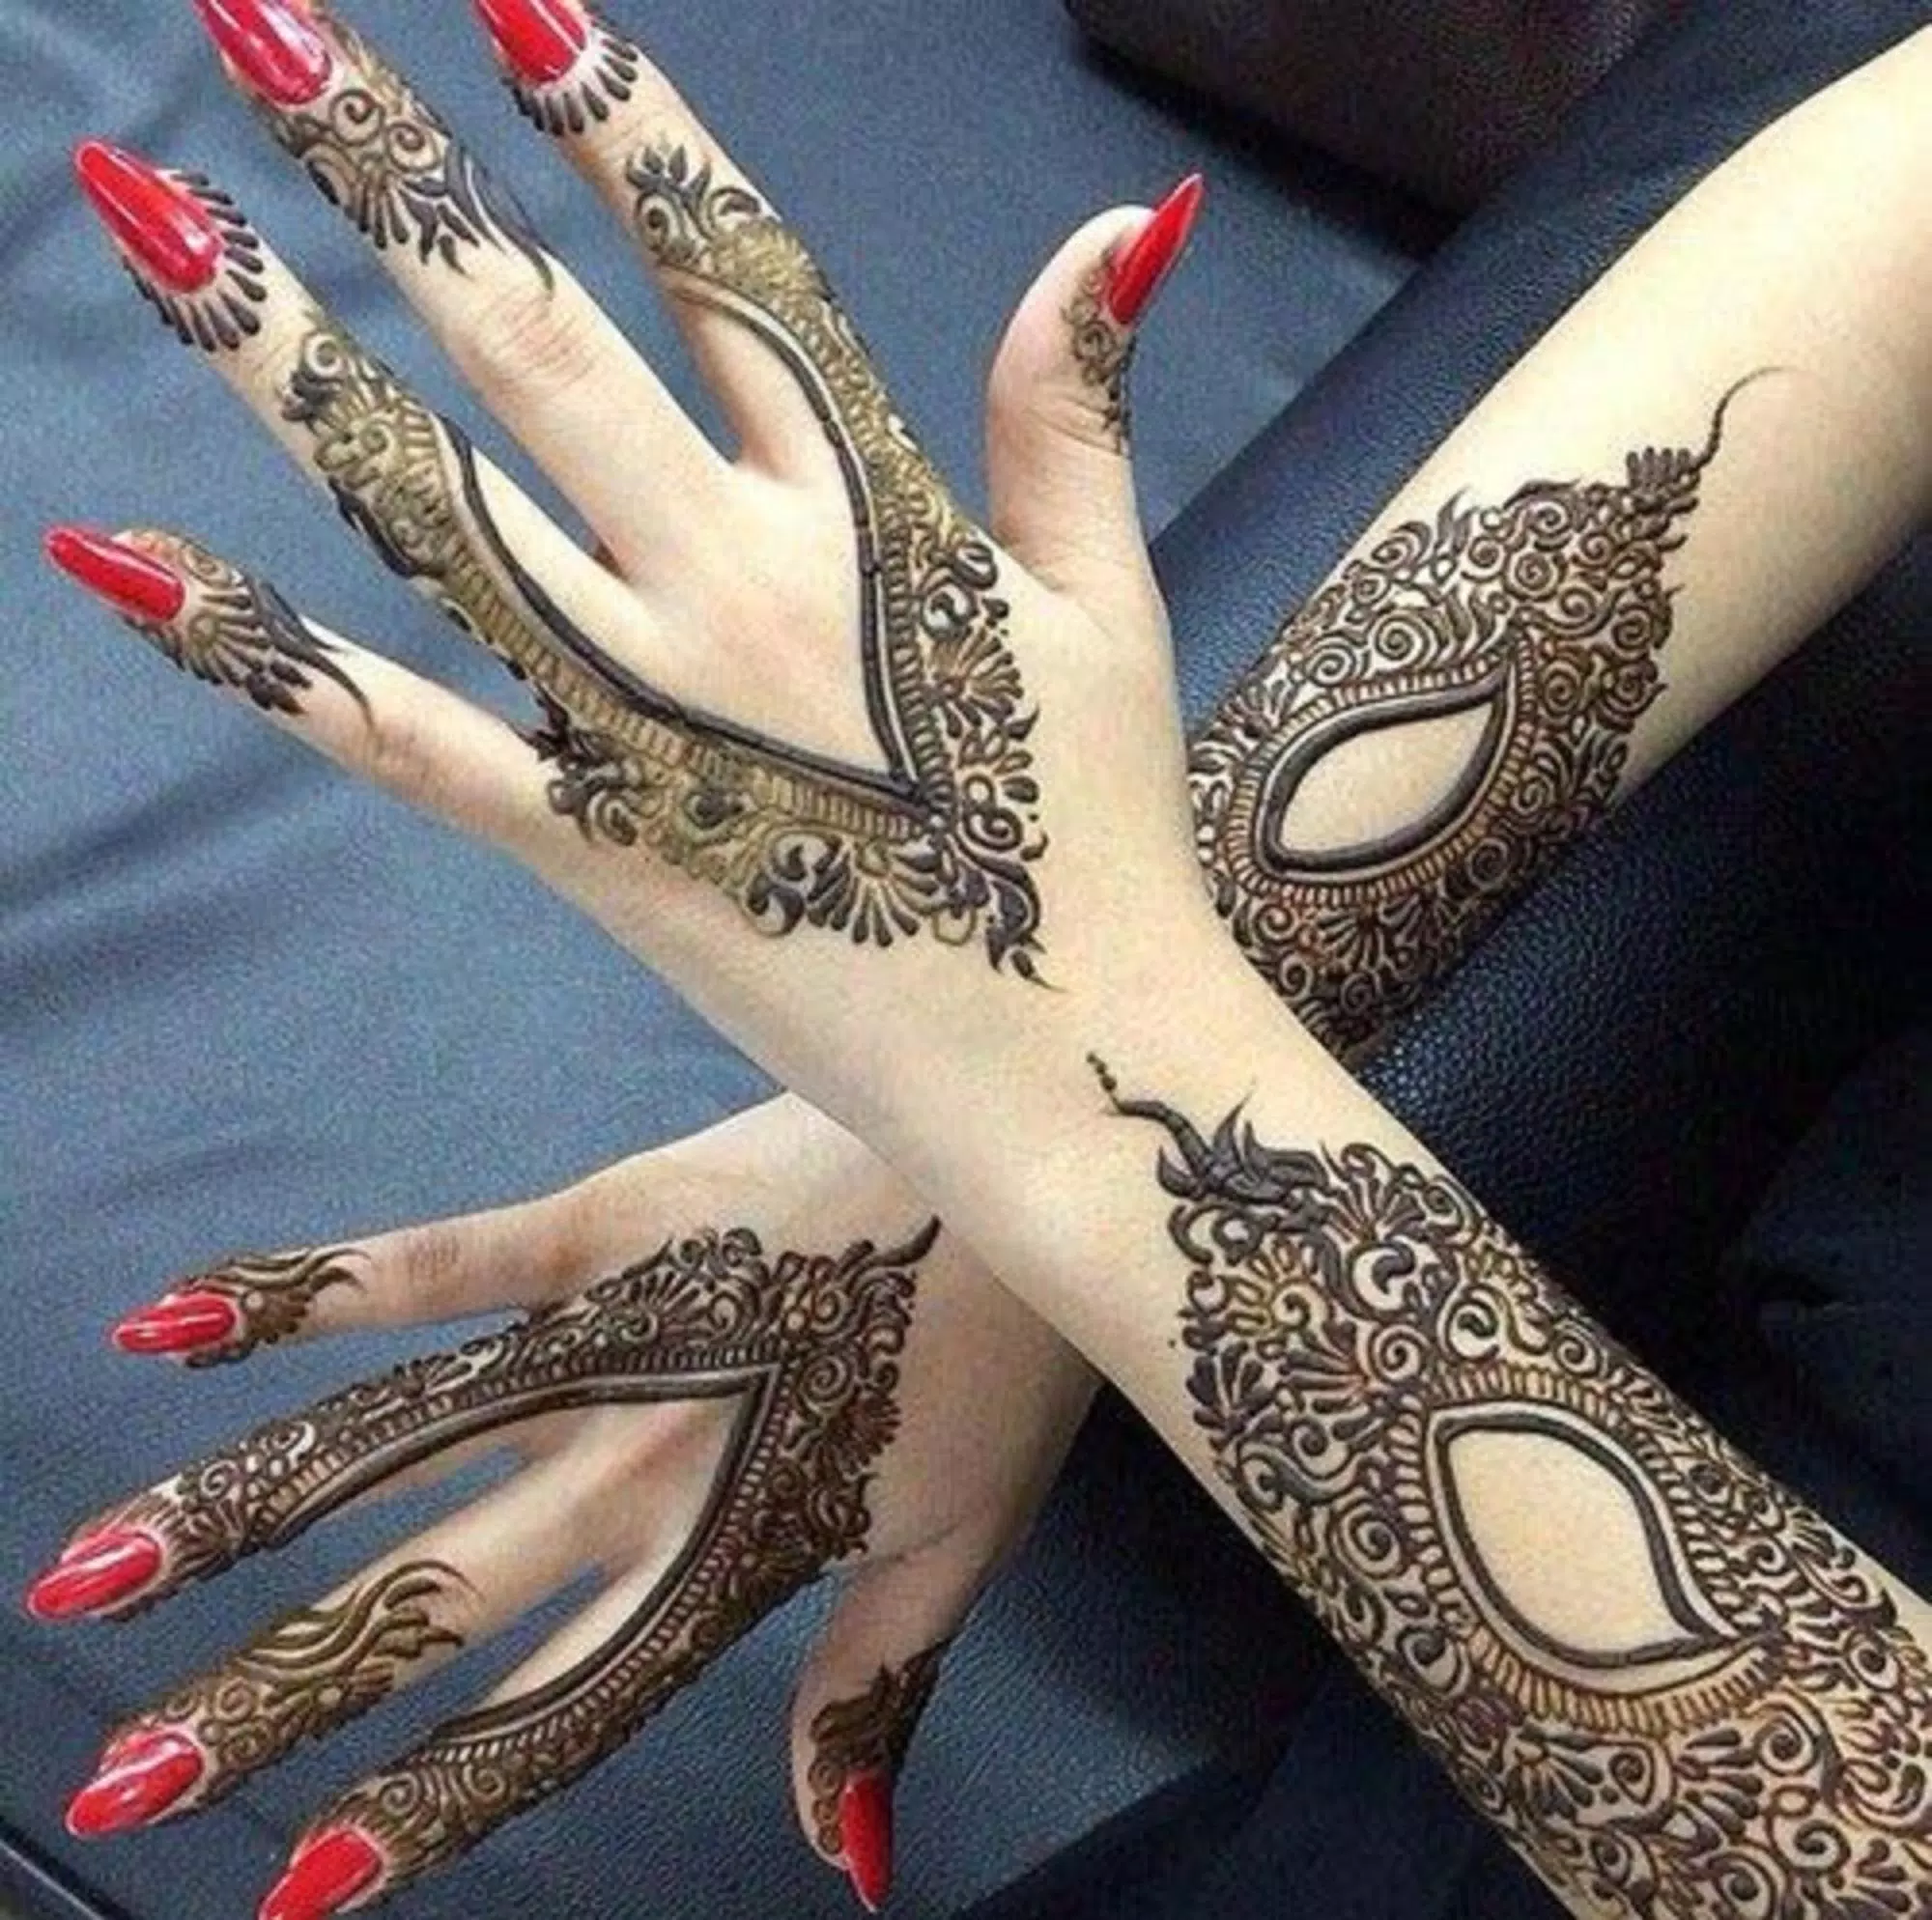 Turkish mehndi design with Pictures!